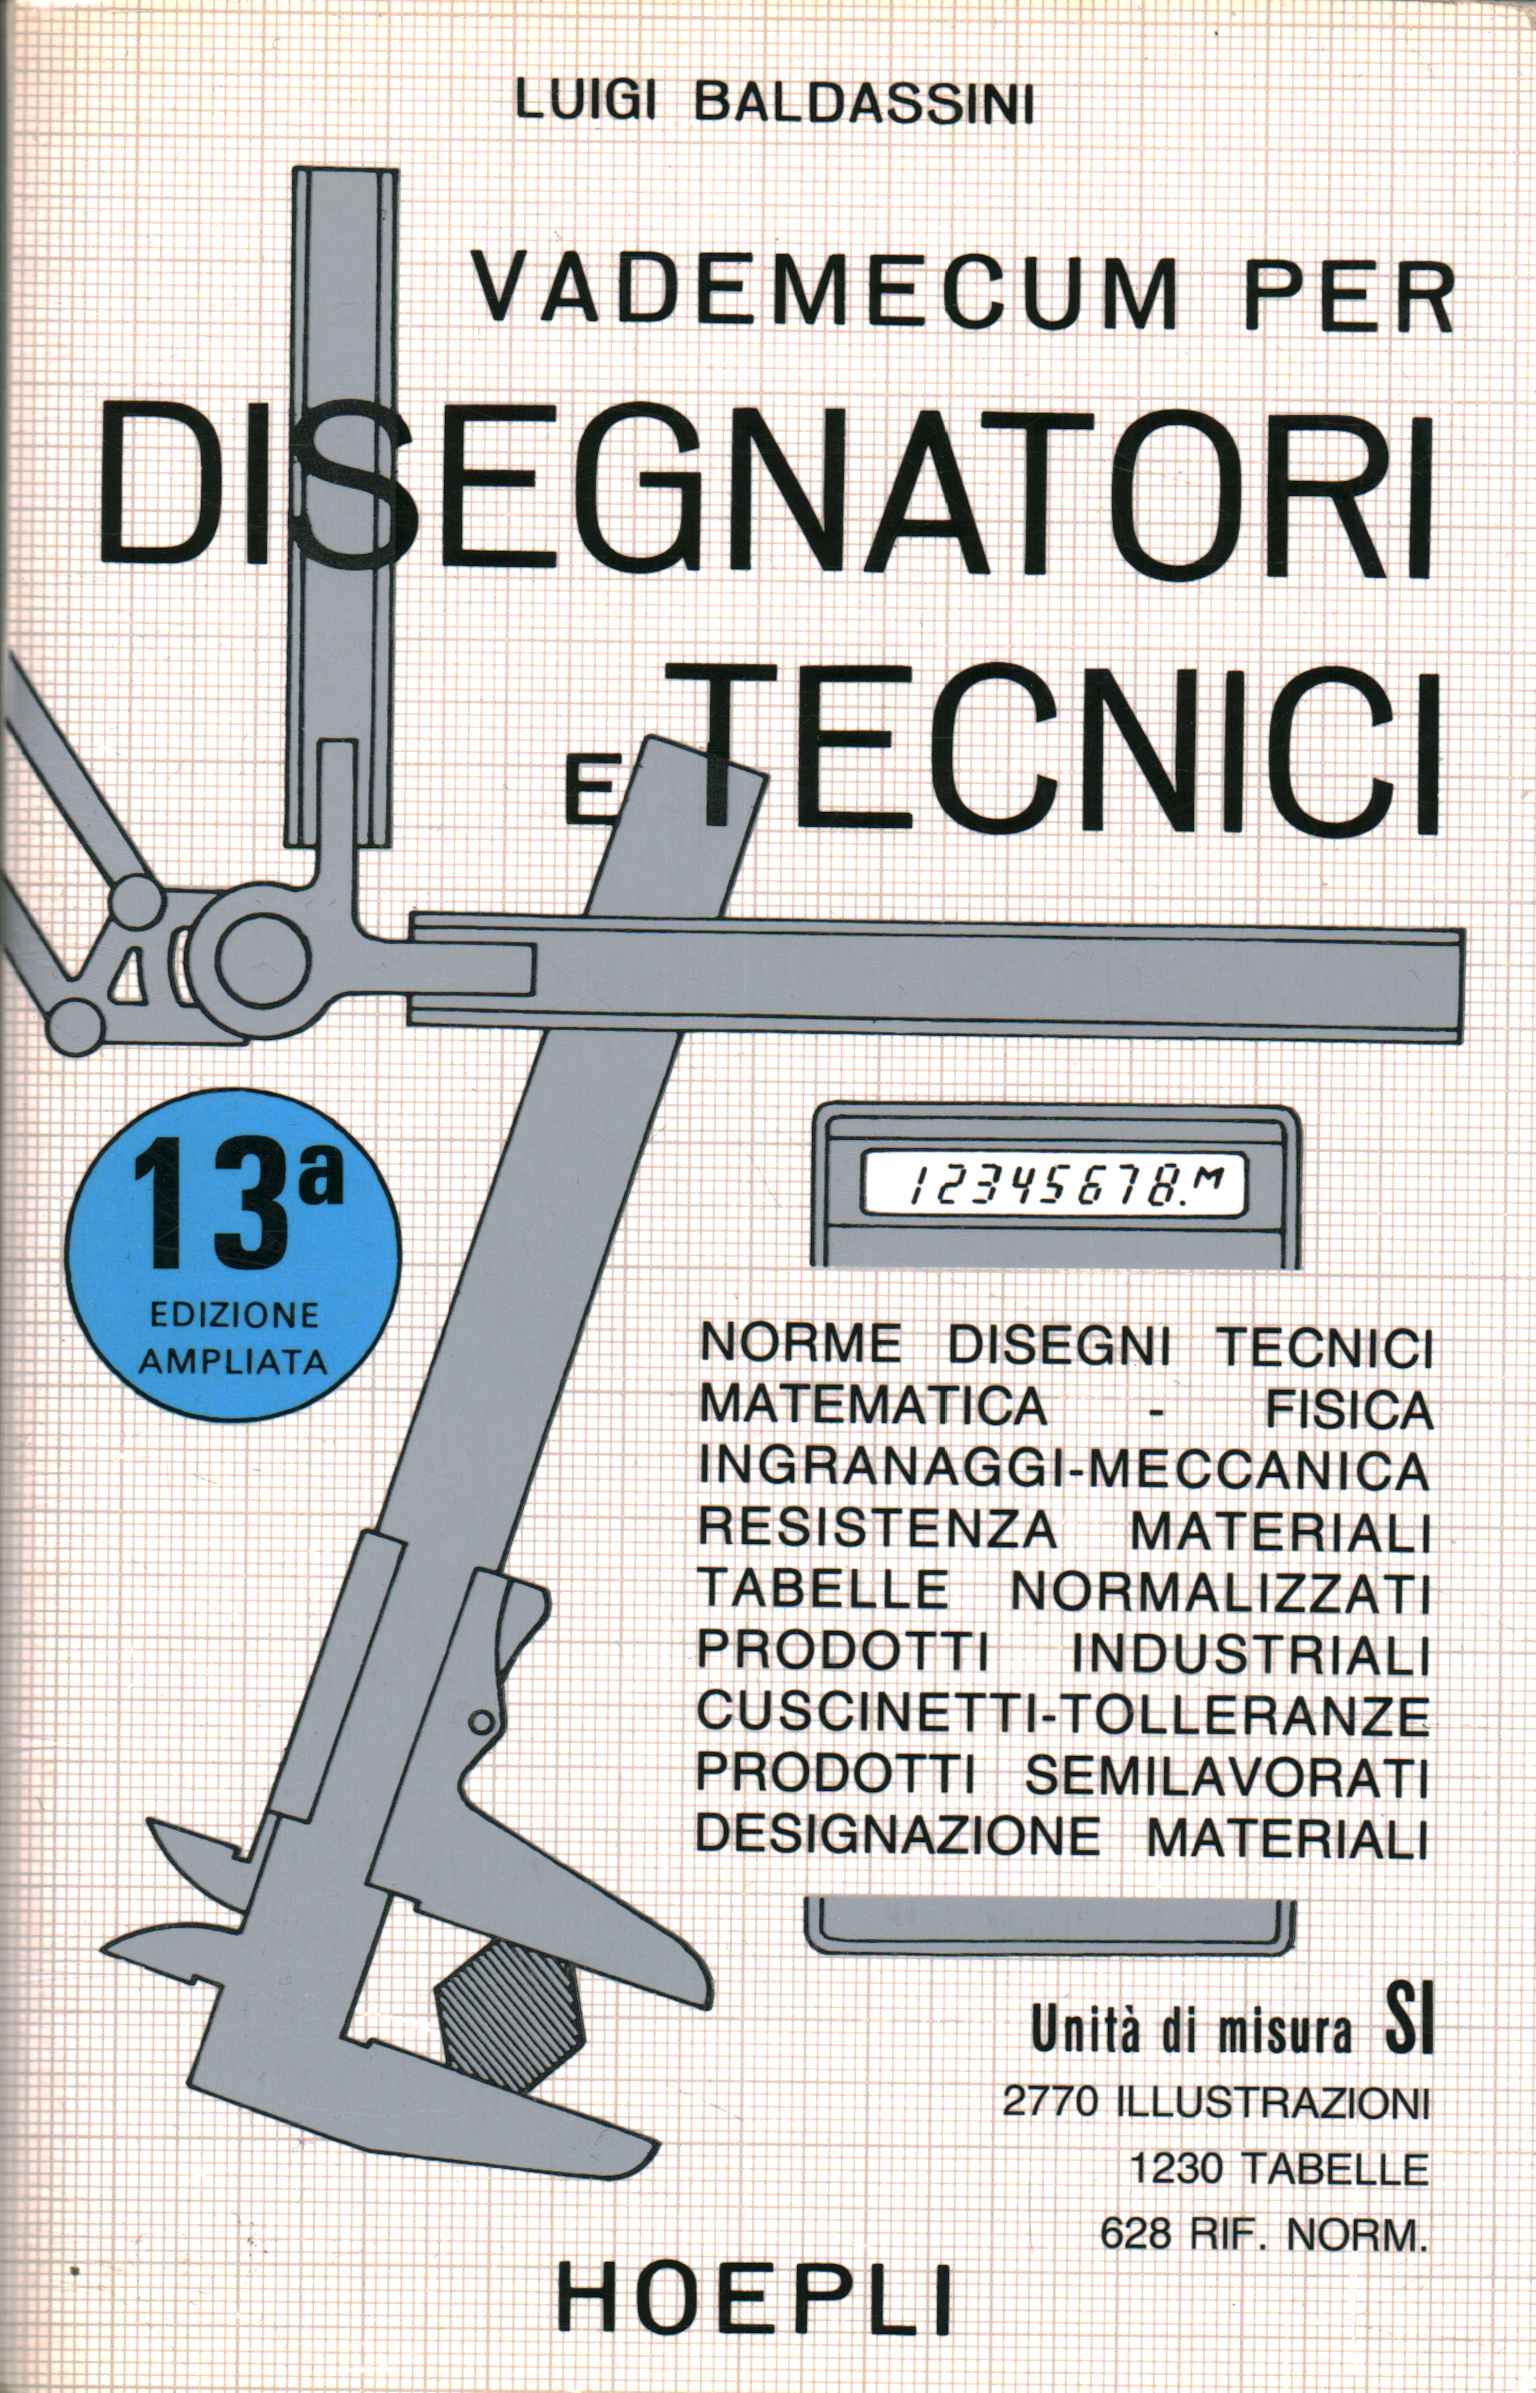 Vademecum for designers and technicians